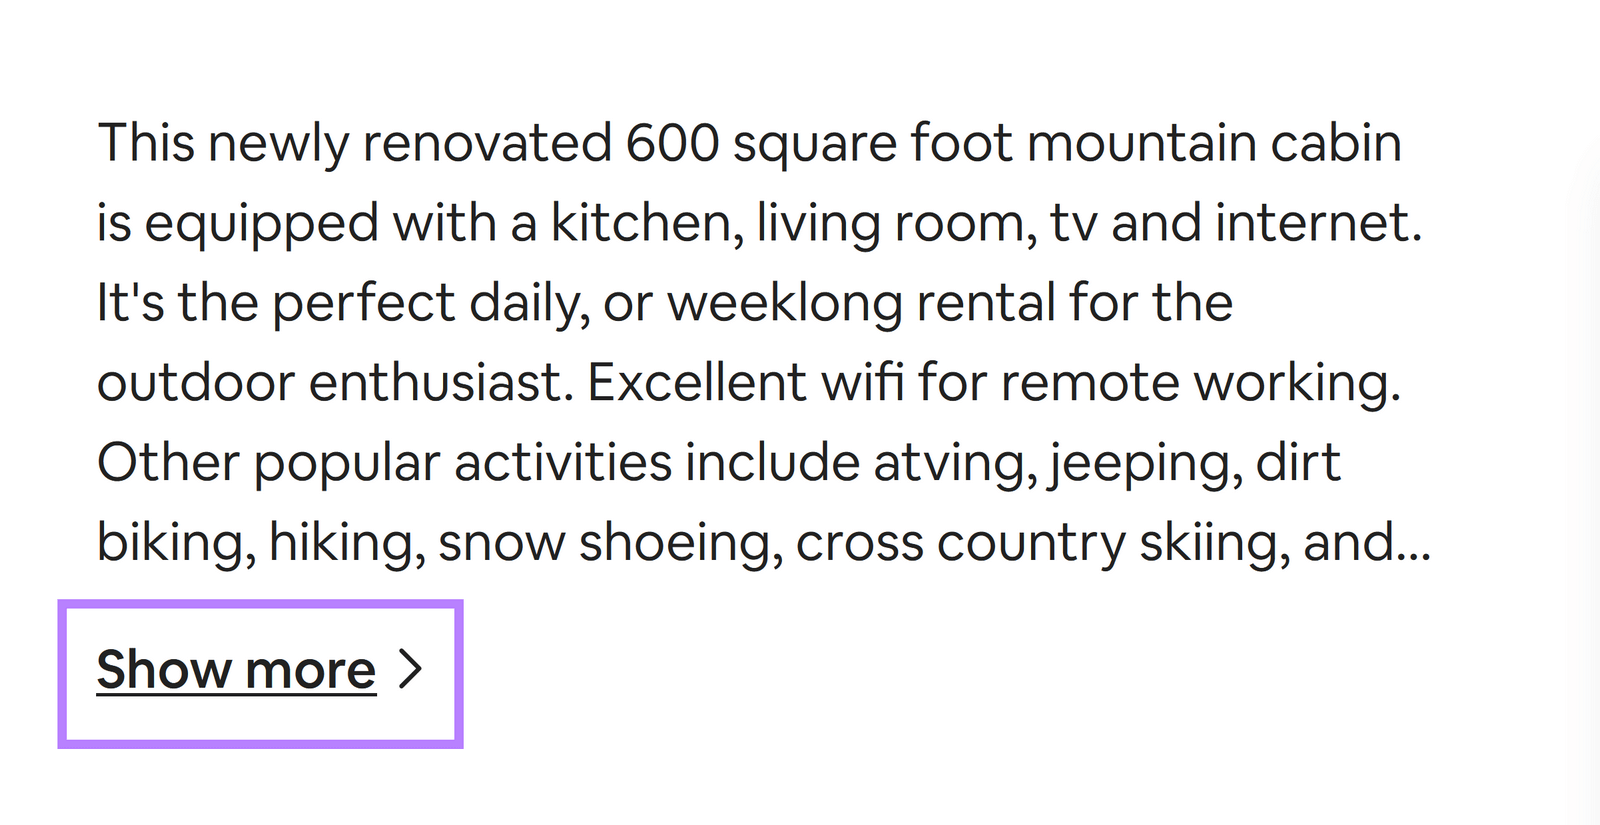 “Show more” button highlighted under the description in the main listing